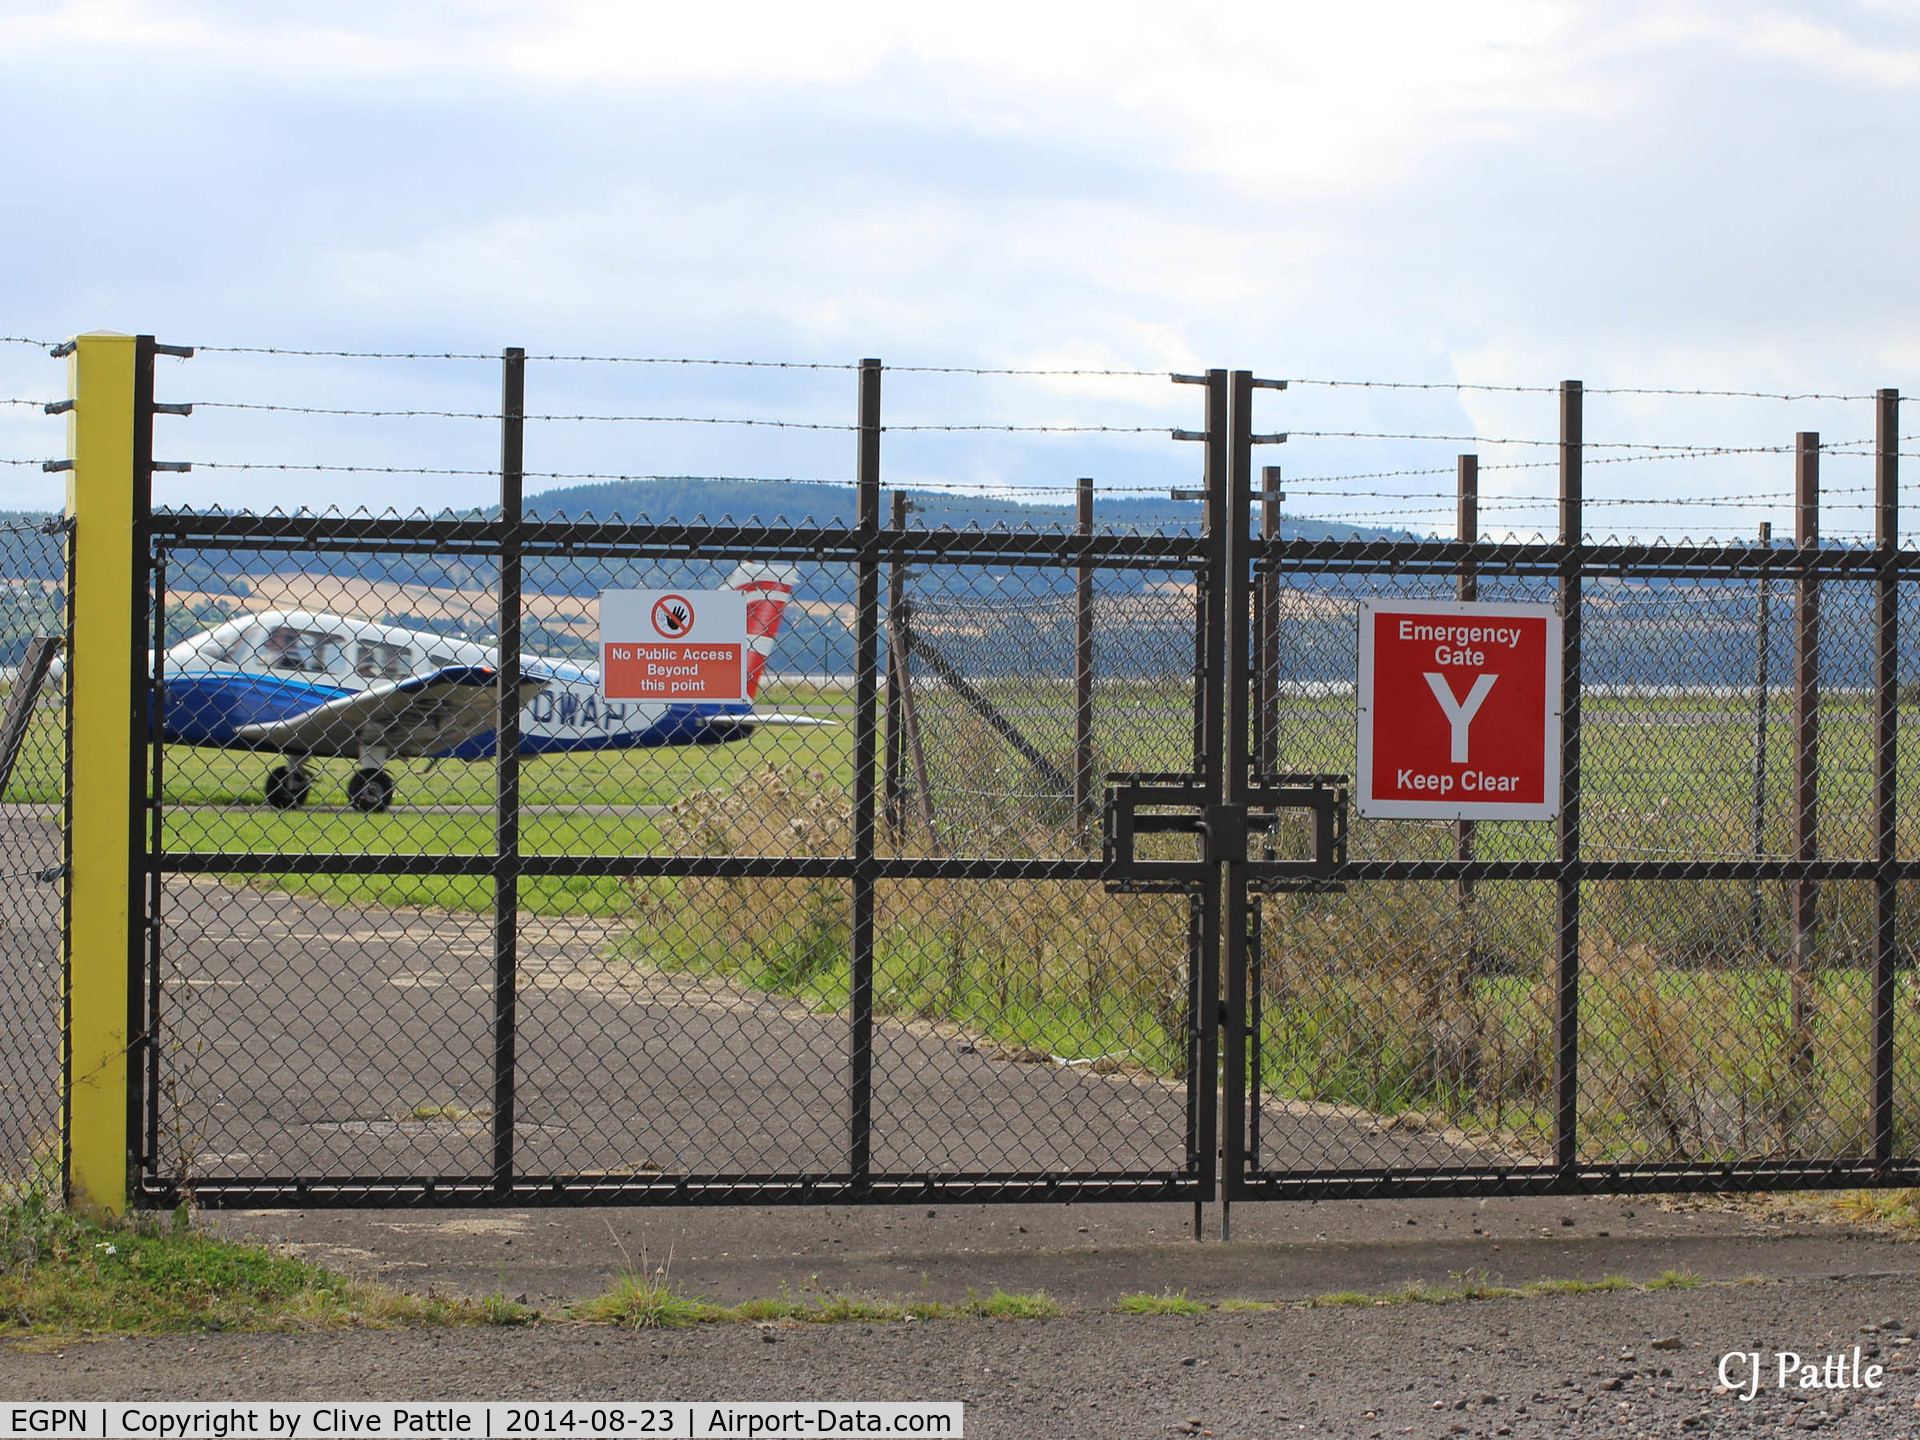 Dundee Airport, Dundee, Scotland United Kingdom (EGPN) - Crash Gate by industrial estate viewing area - take a pair of steps if you want to take photos or stick your lens thru a hole !.